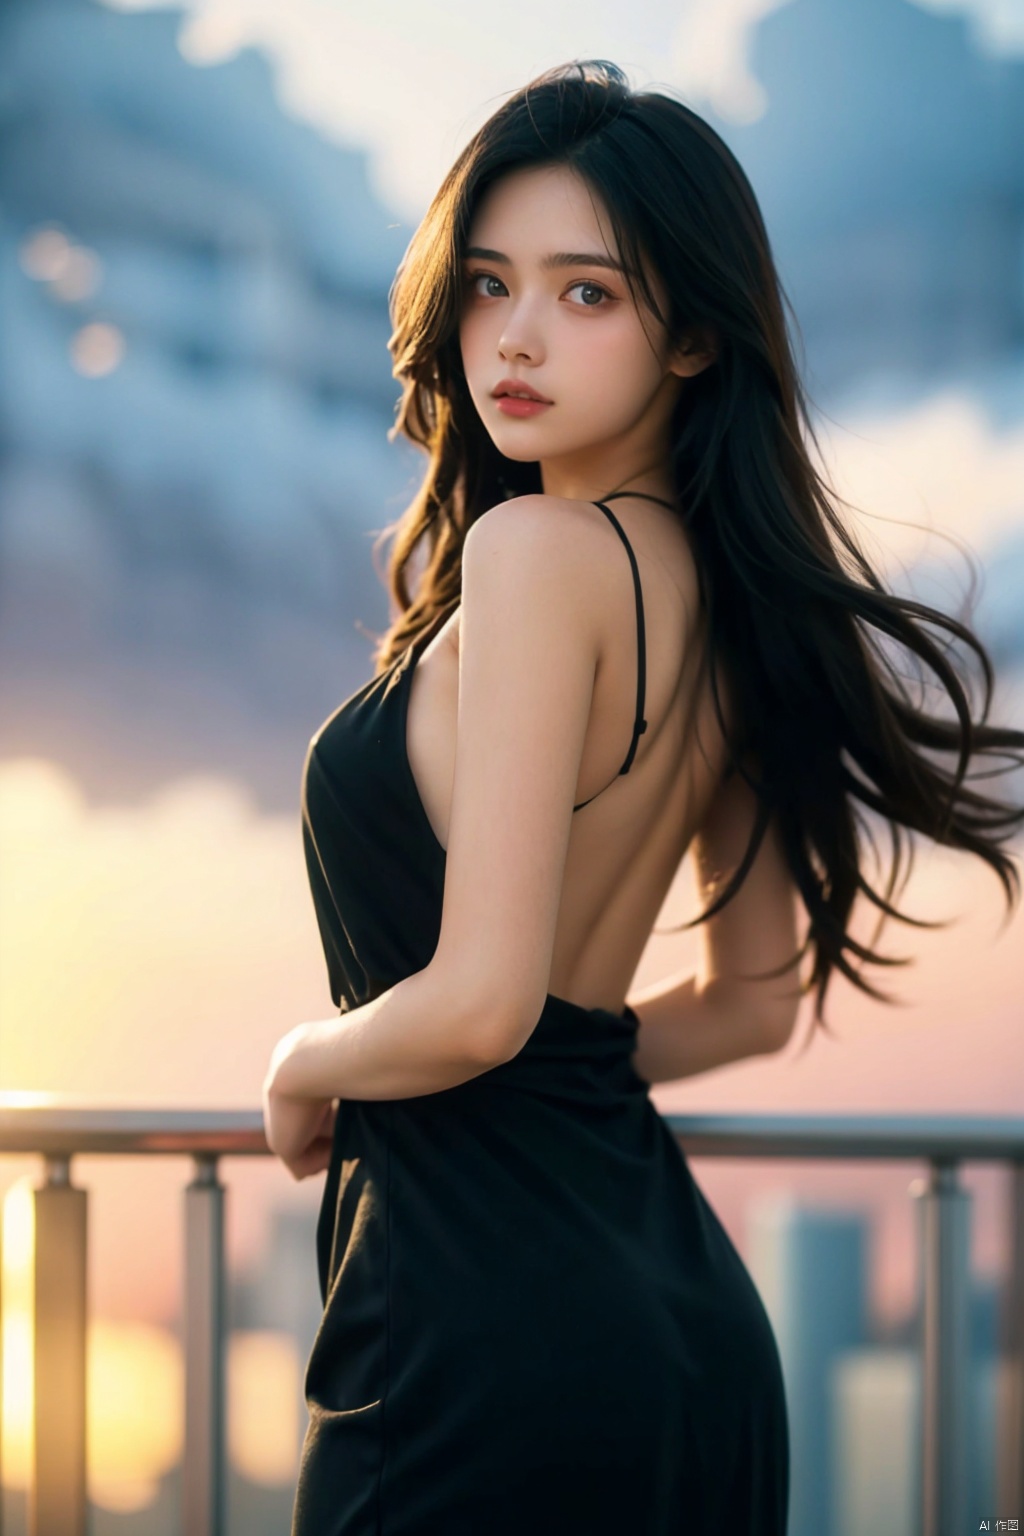  Realistic photography, on the roof of a skyscraper, a 20-year-old girl stands, wearing a slim black dress, looking straight into the camera. Behind her, numerous skyscrapers stretch into the distance, Canon 5DMarkⅳ, 35MM lens aperture 1.2, background blacked out. A perfect twilight moment, the late afternoon sun casts a warm glow on the girl's face, enhancing the impact of the scene. This photograph captures a quiet and warm feeling, and sharpness and realism make every detail vivid and clear. Straight black hair, over the waist long hair flowing in the wind, backless. Vibrant, breathtakingly beautiful, hip wrap dress\(yedian\), jy